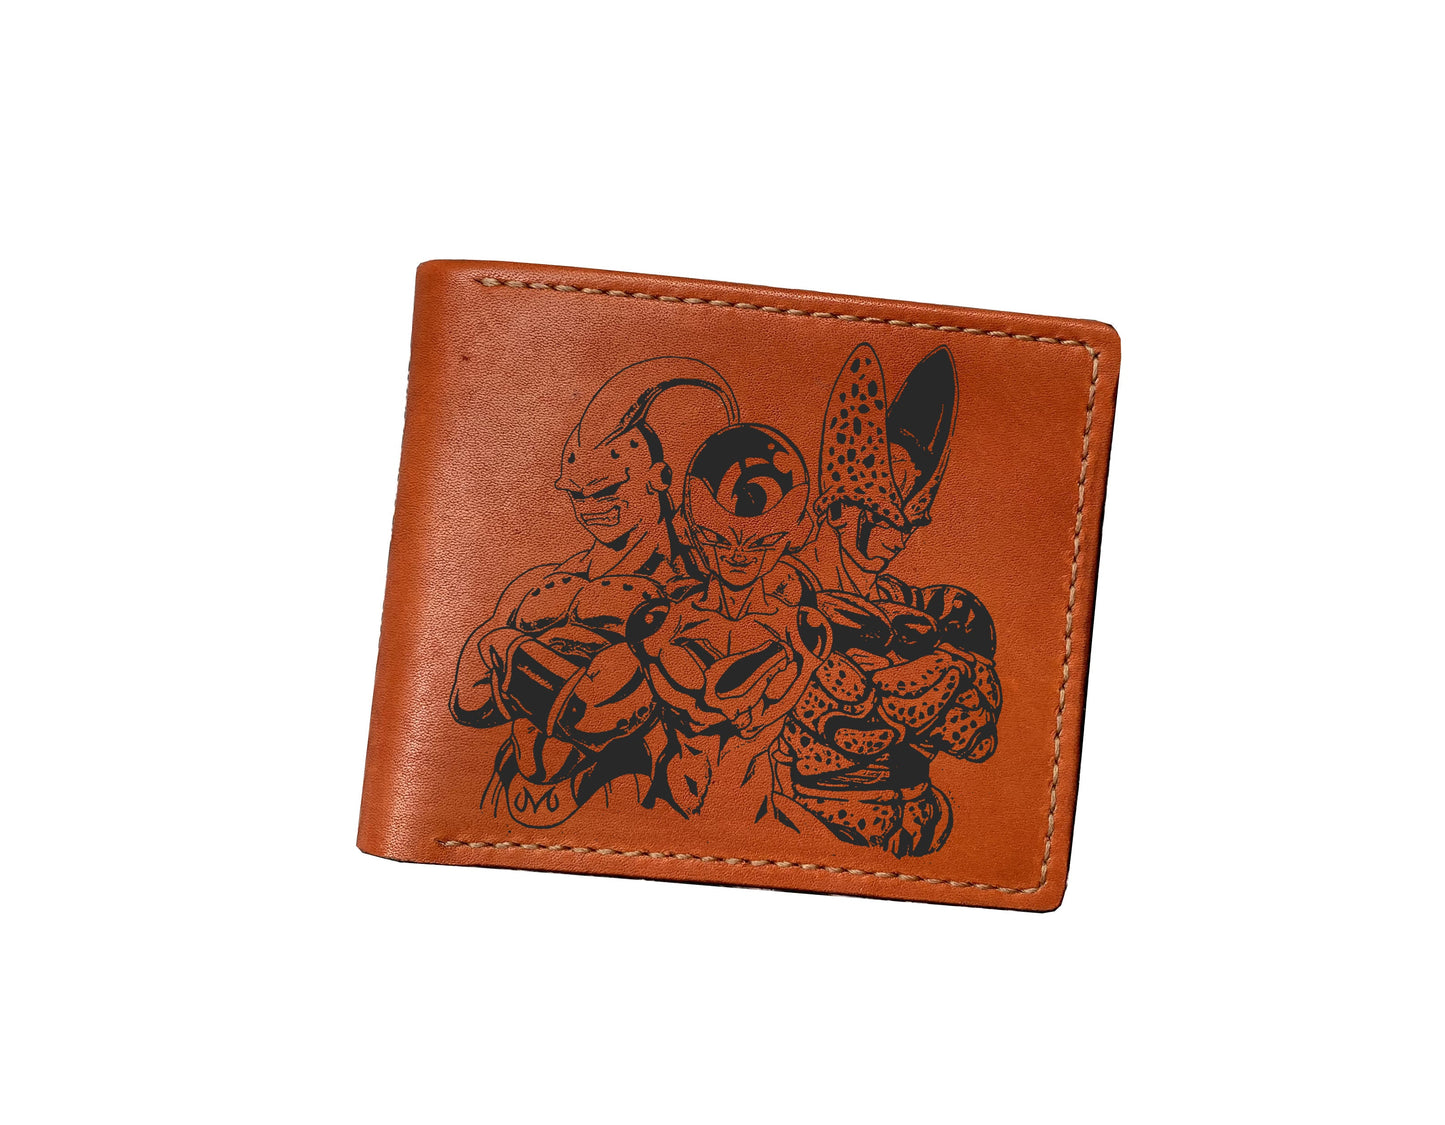 Mayan Corner - Dragon ball characters drawing leather wallet, fan art leather gift for men, wallet for him, leather anniversary present ideas - Vegeta super saiyan